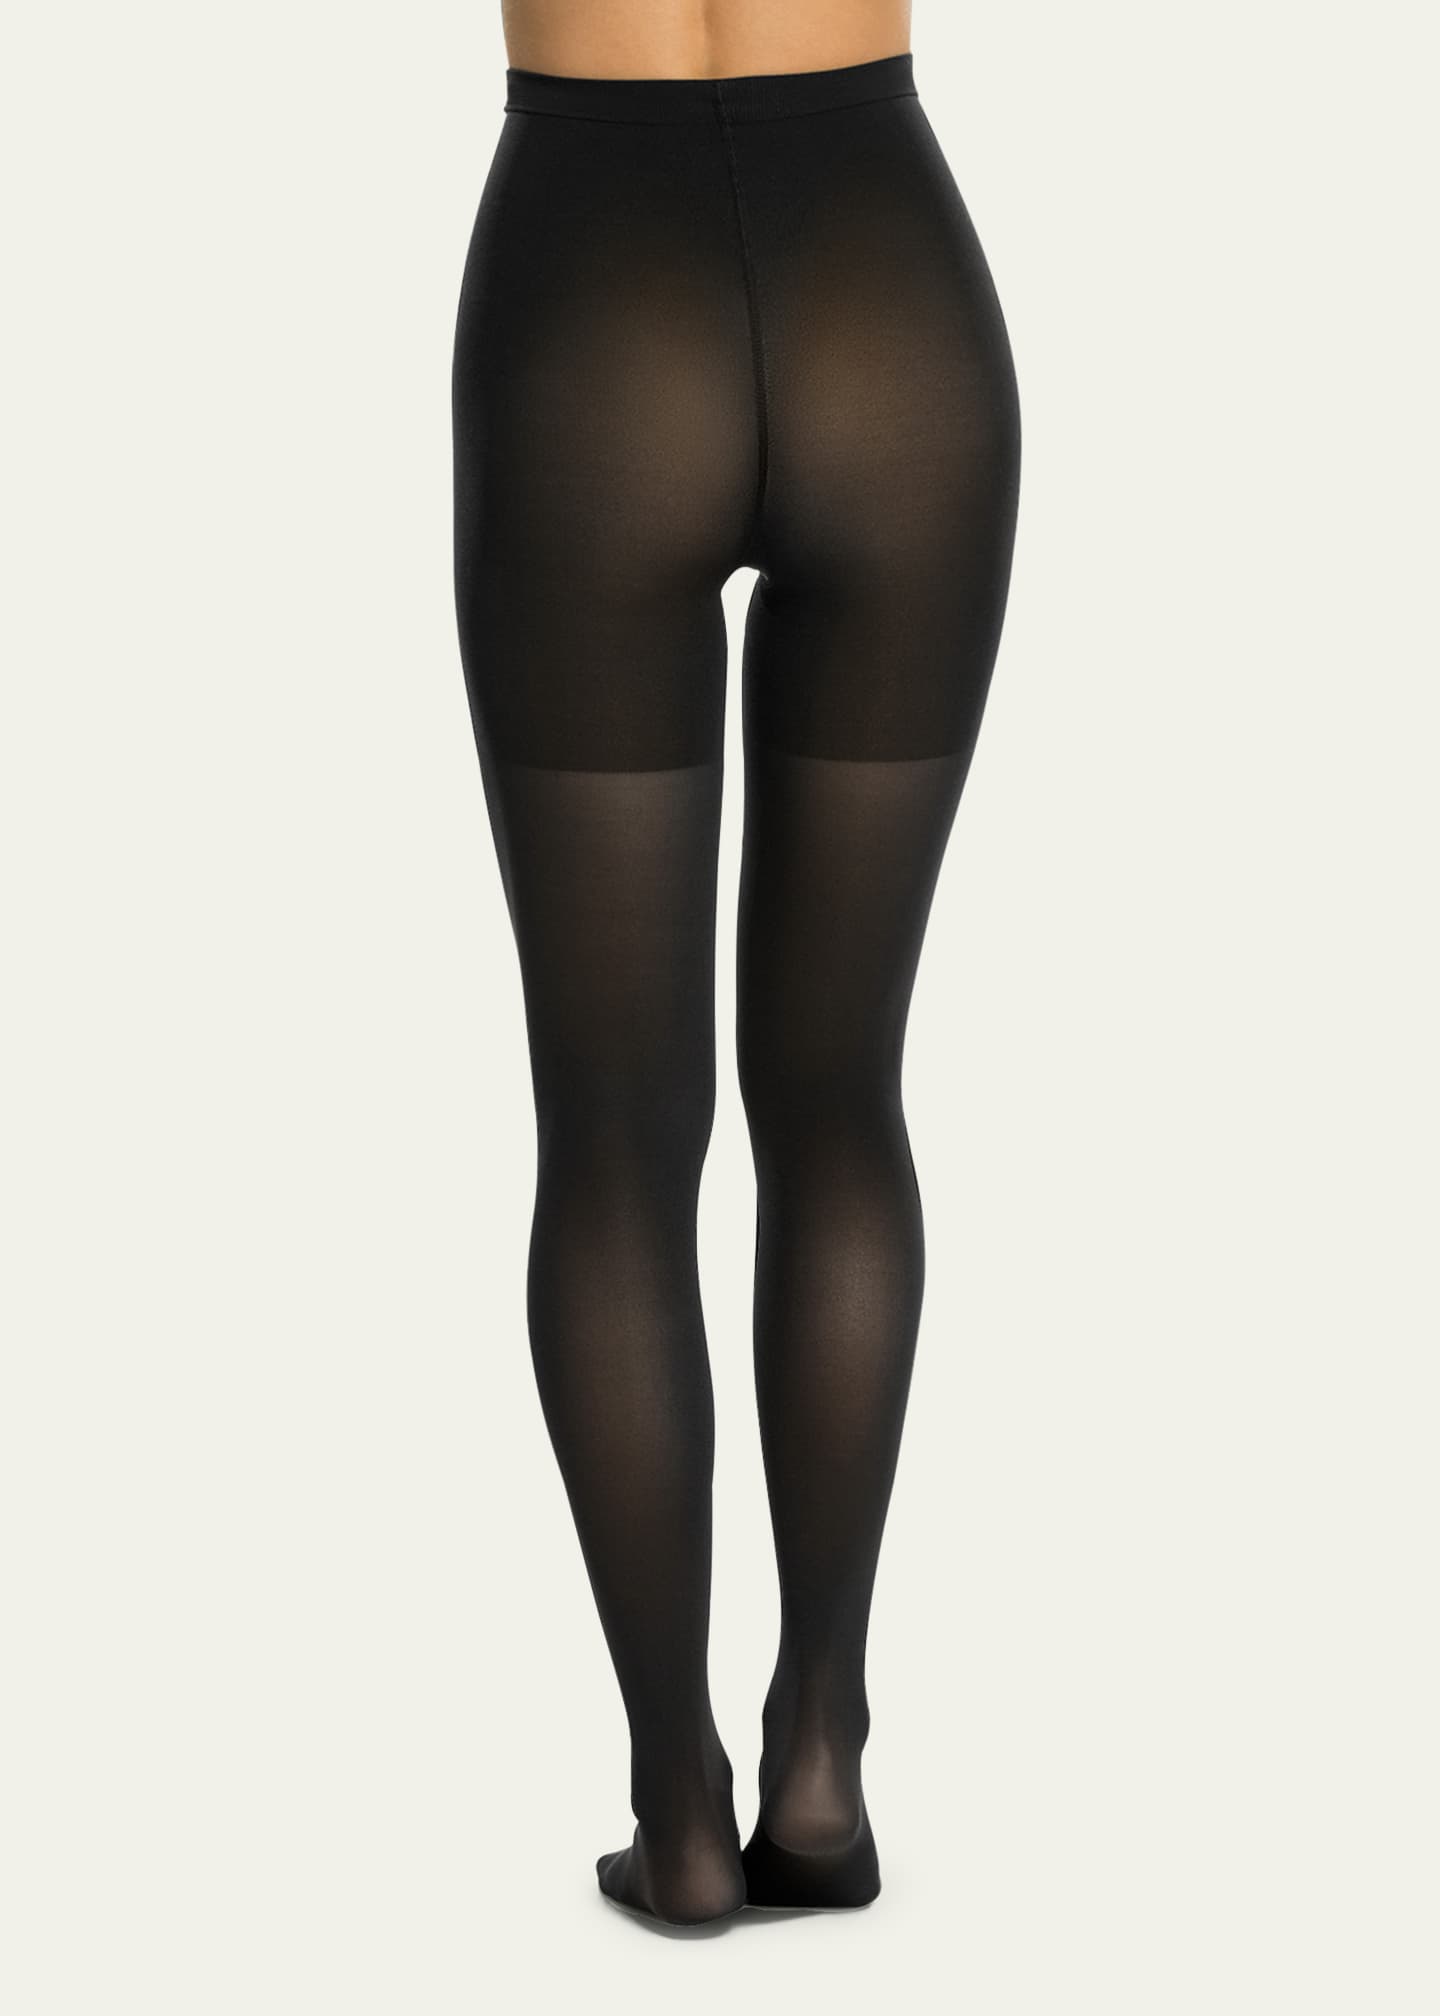 Spanx Luxe Sheer Shaping Tights Image 3 of 4